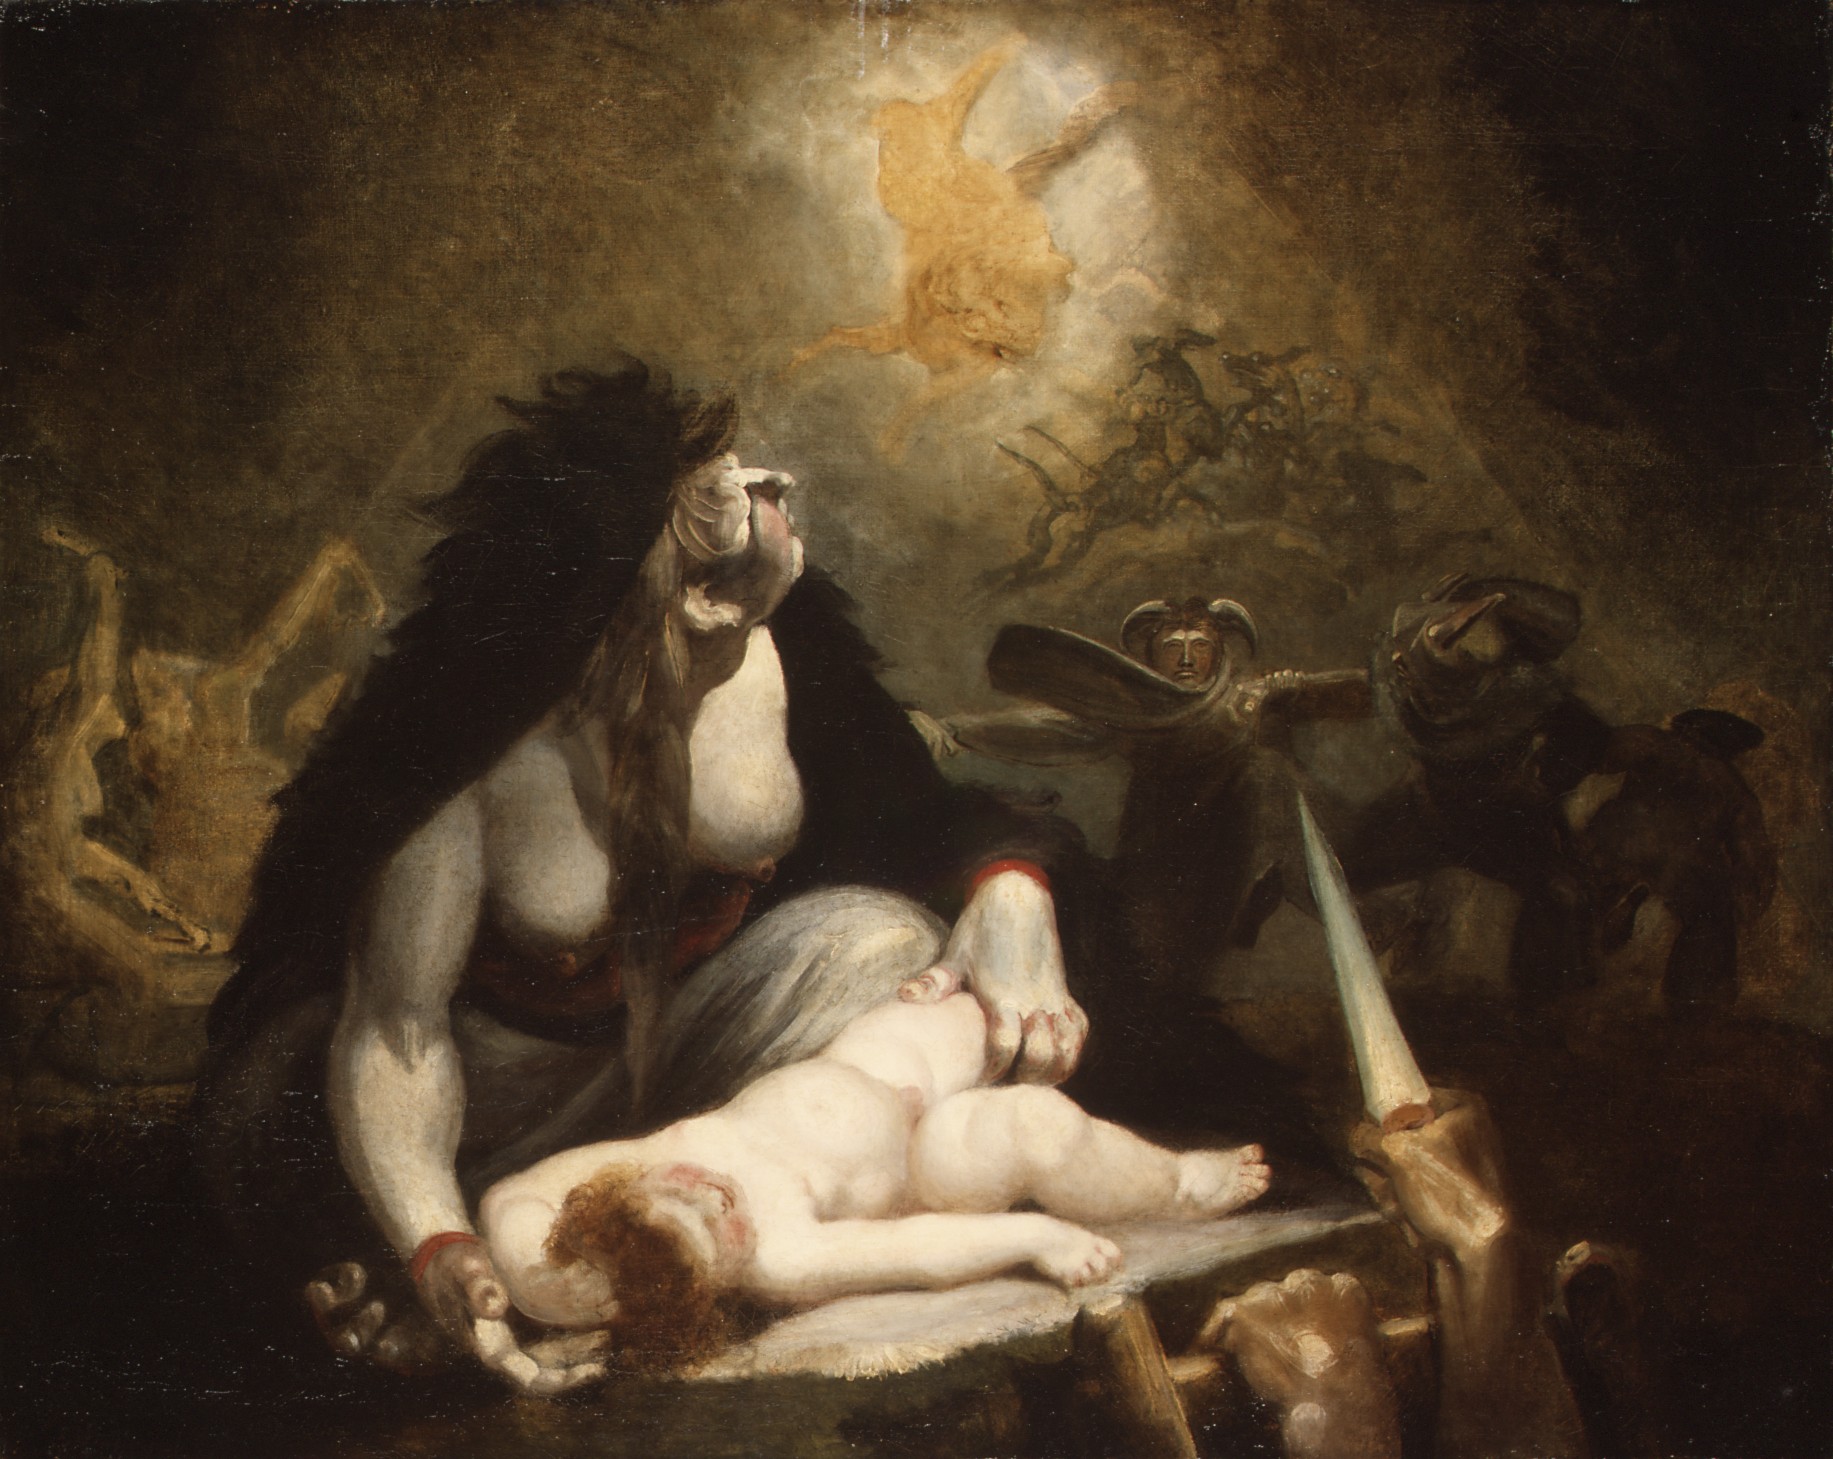 The Night-Hag Visiting Lapland Witches by Henry Fuseli - 1798 - 101.6 x 126.4 cm Metropolitan Museum of Art